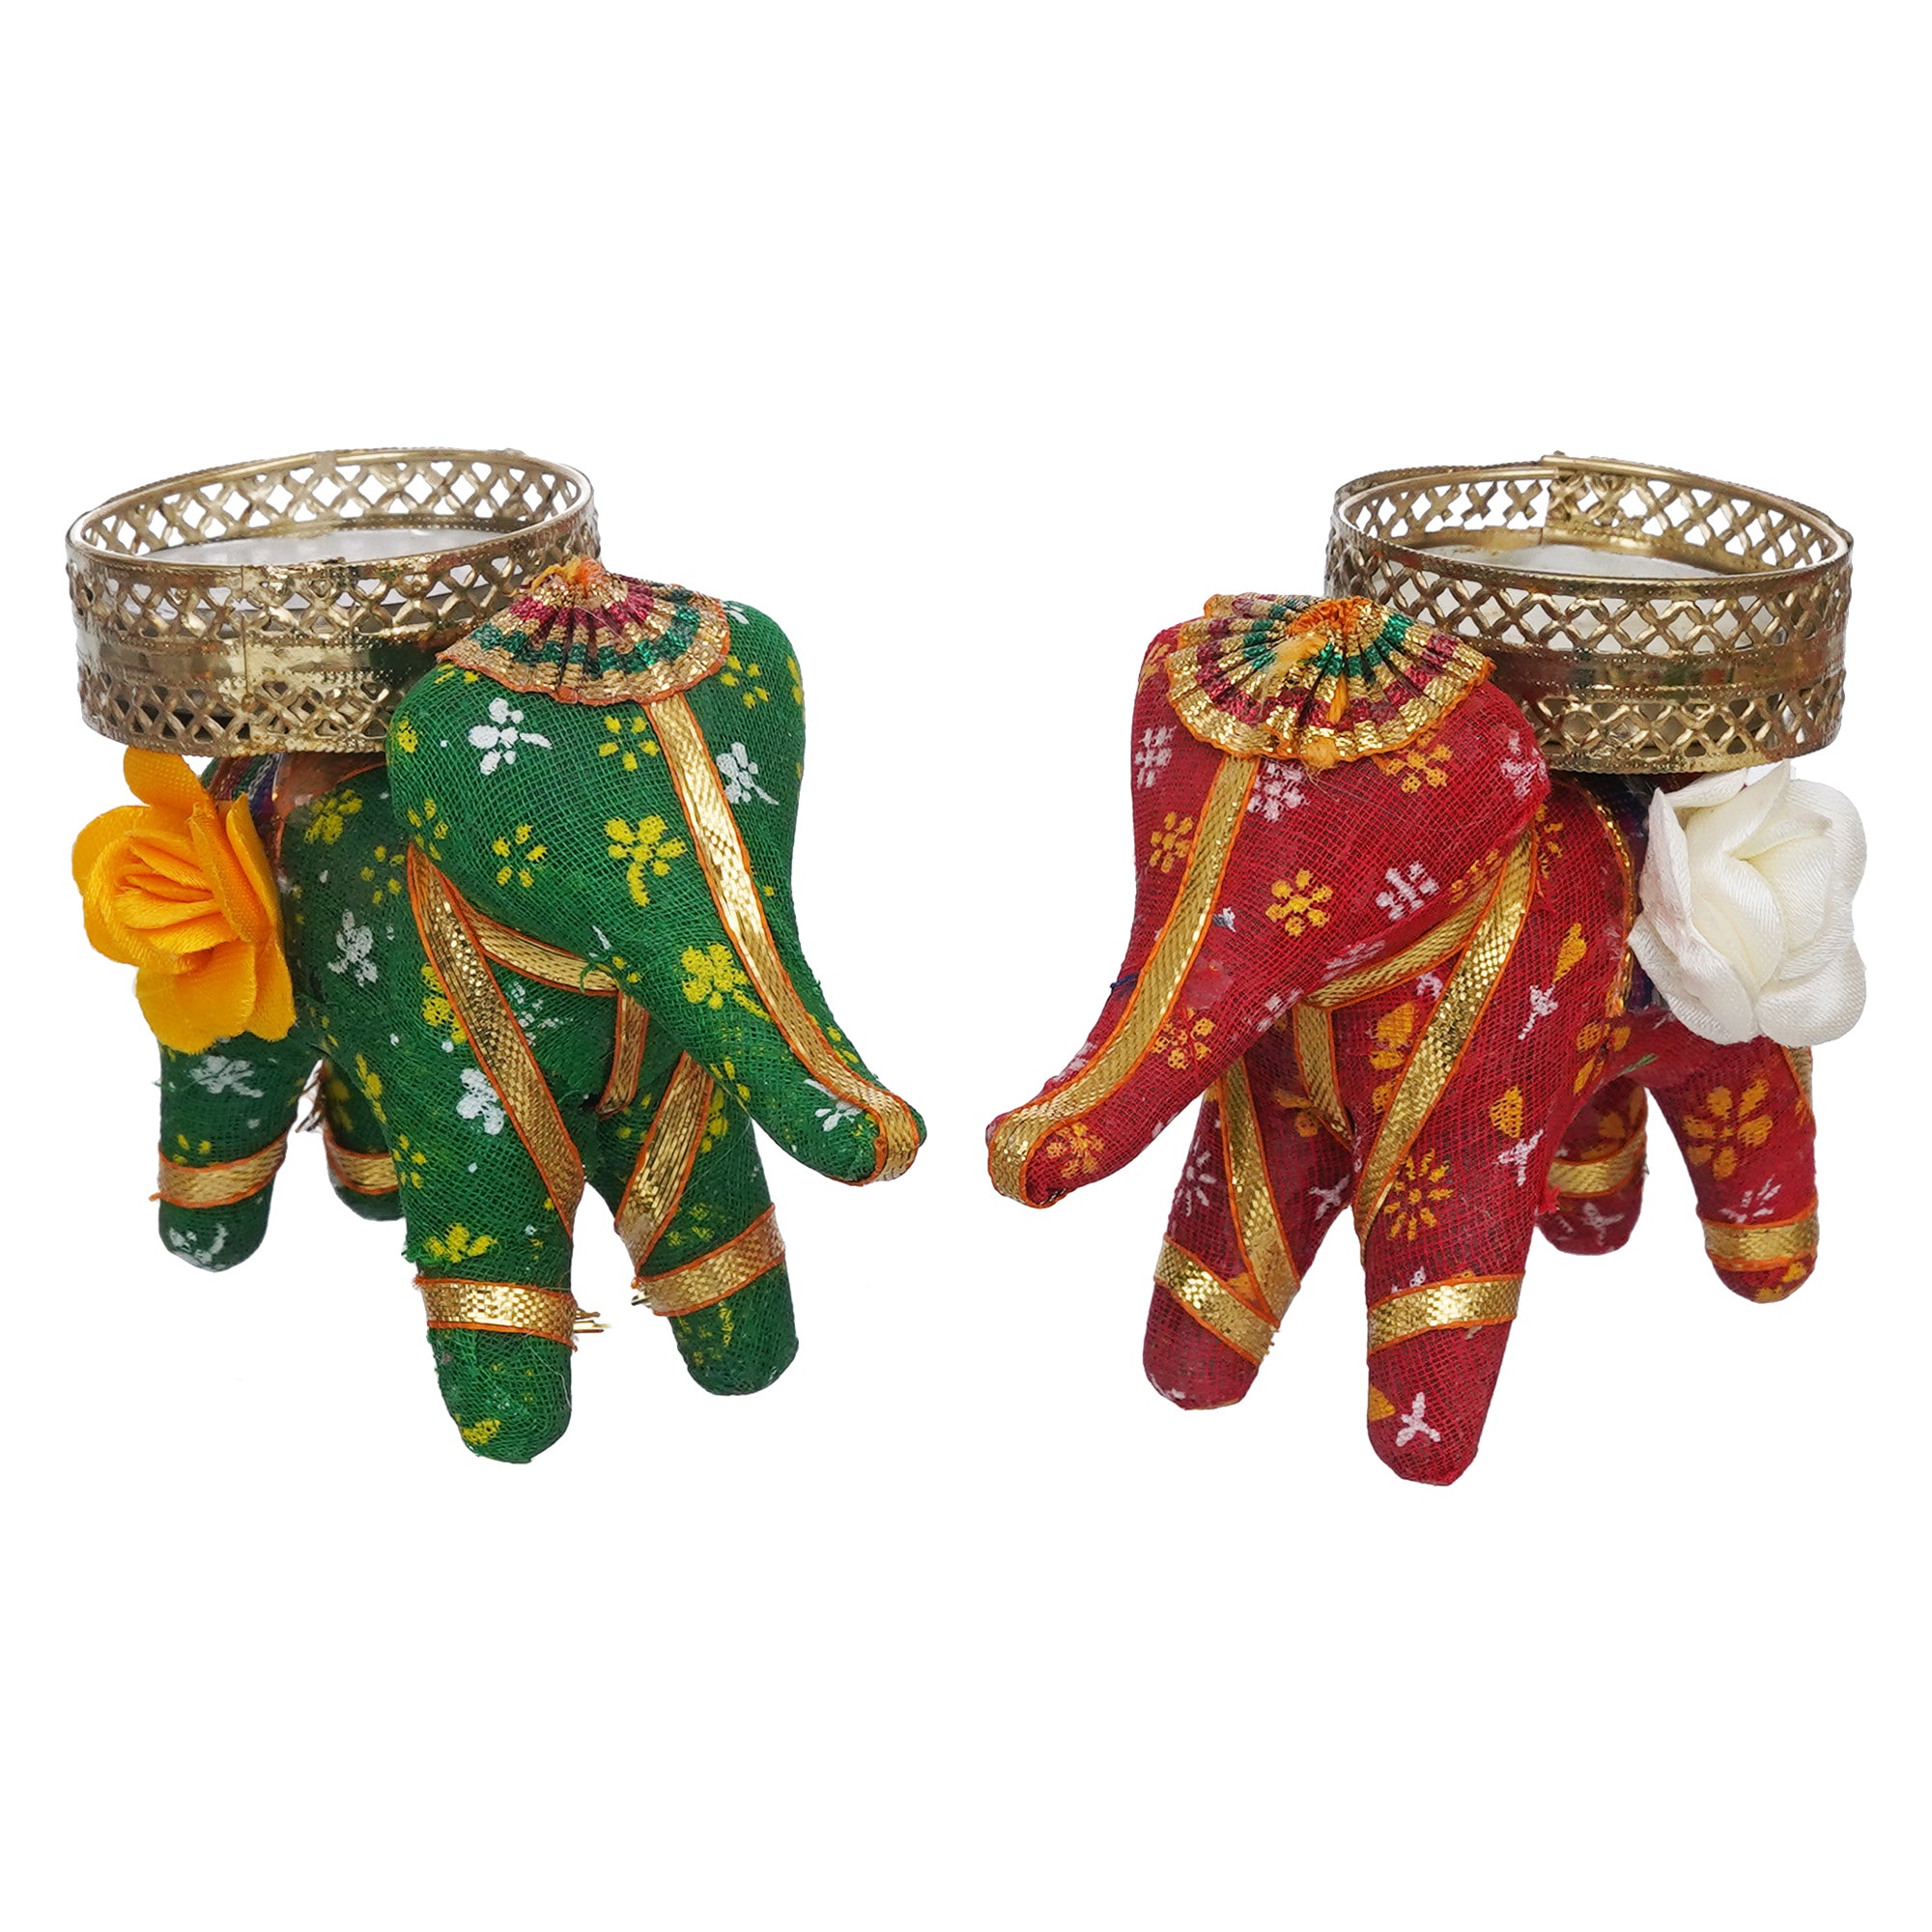 eCraftIndia Red and Green Elephant Decorative Tea Light Candle Holders (Set of 2) 2